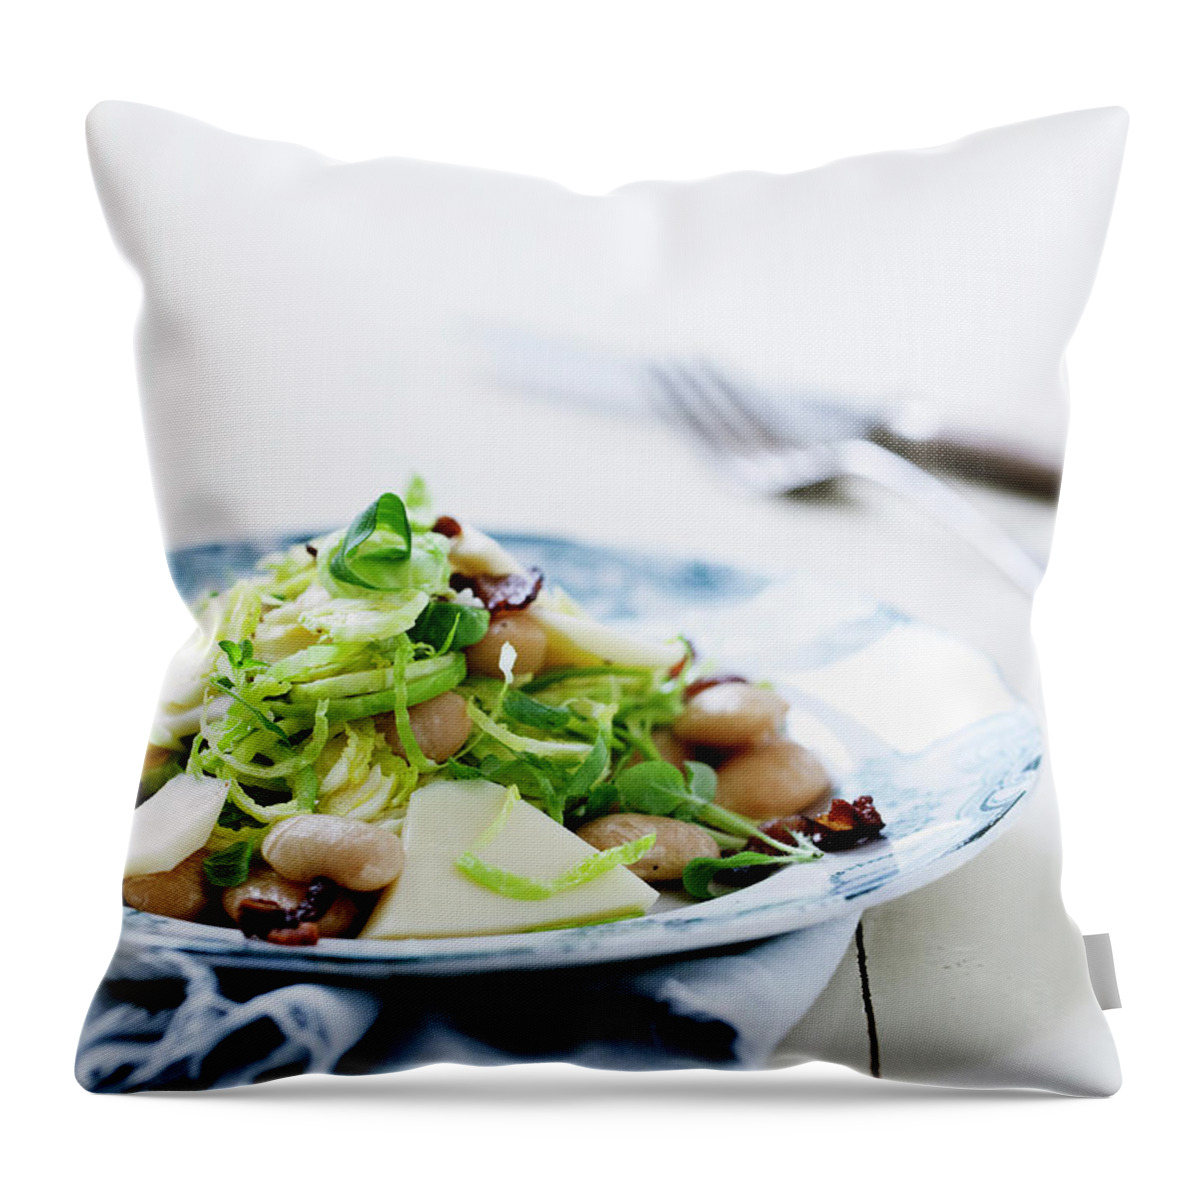 Cheese Throw Pillow featuring the photograph Plate Of Beans And Salad by Line Klein